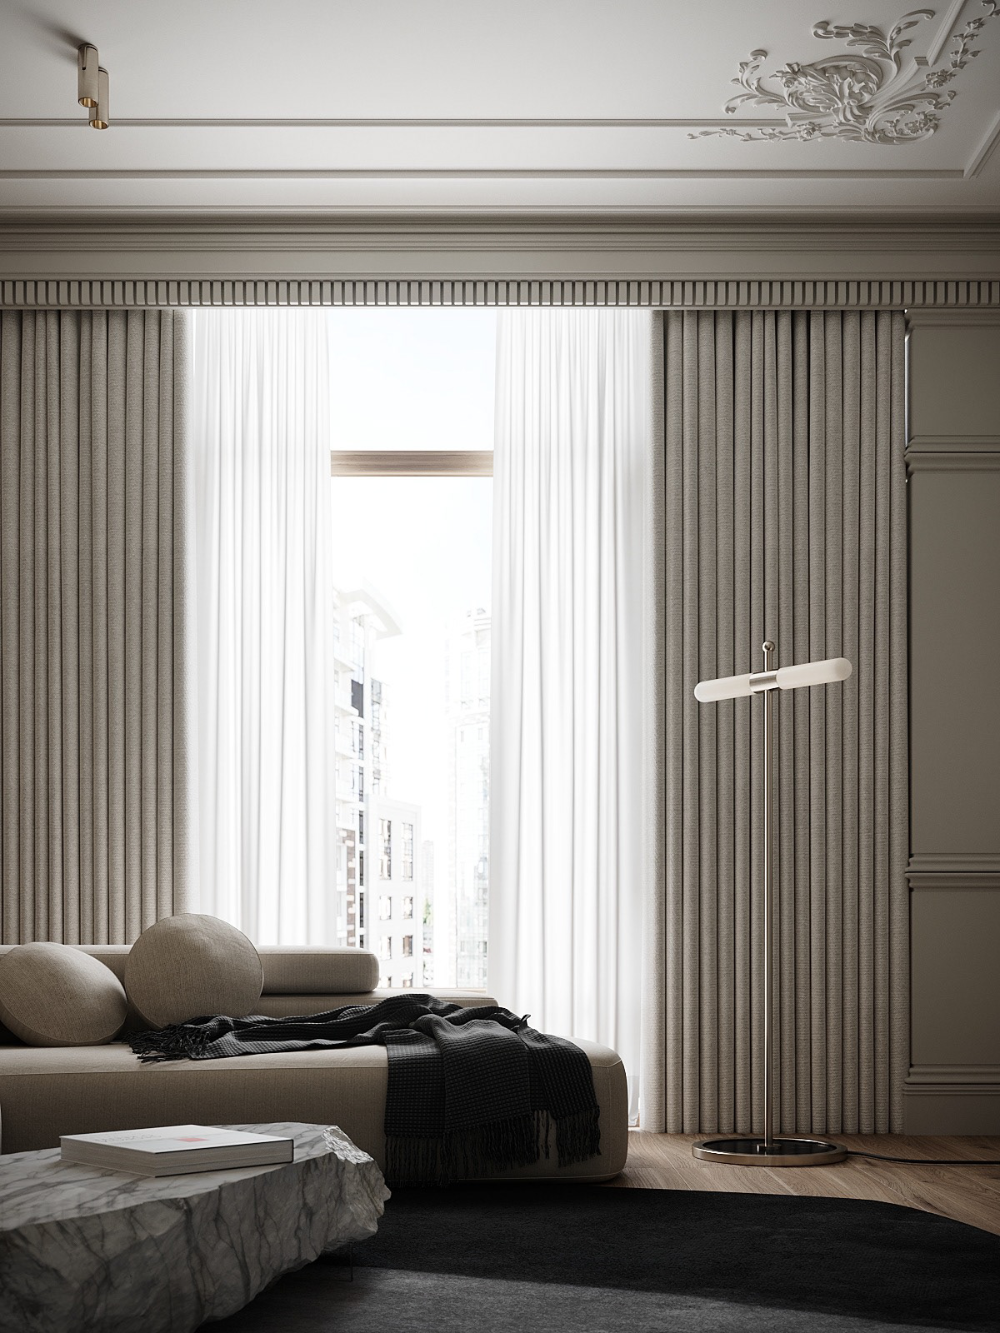 Luxury Curtains: Elevate Your Home Décor with Opulent Window Treatments